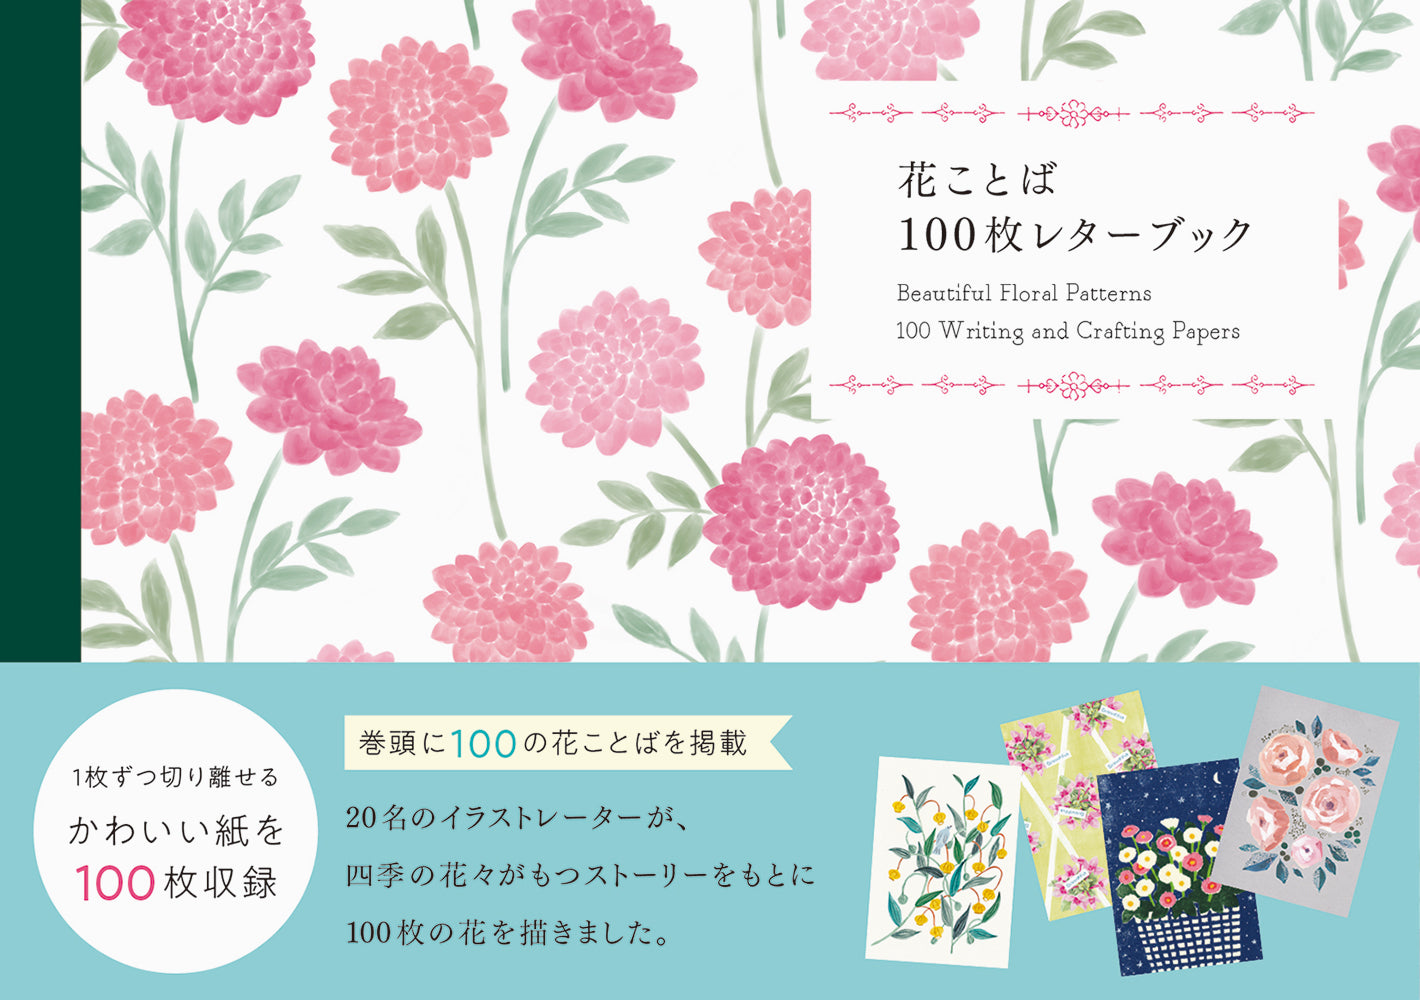 100 Writing and Crafting Papers: Beautiful Floral Patterns (Japanese only, mostly visual) cover